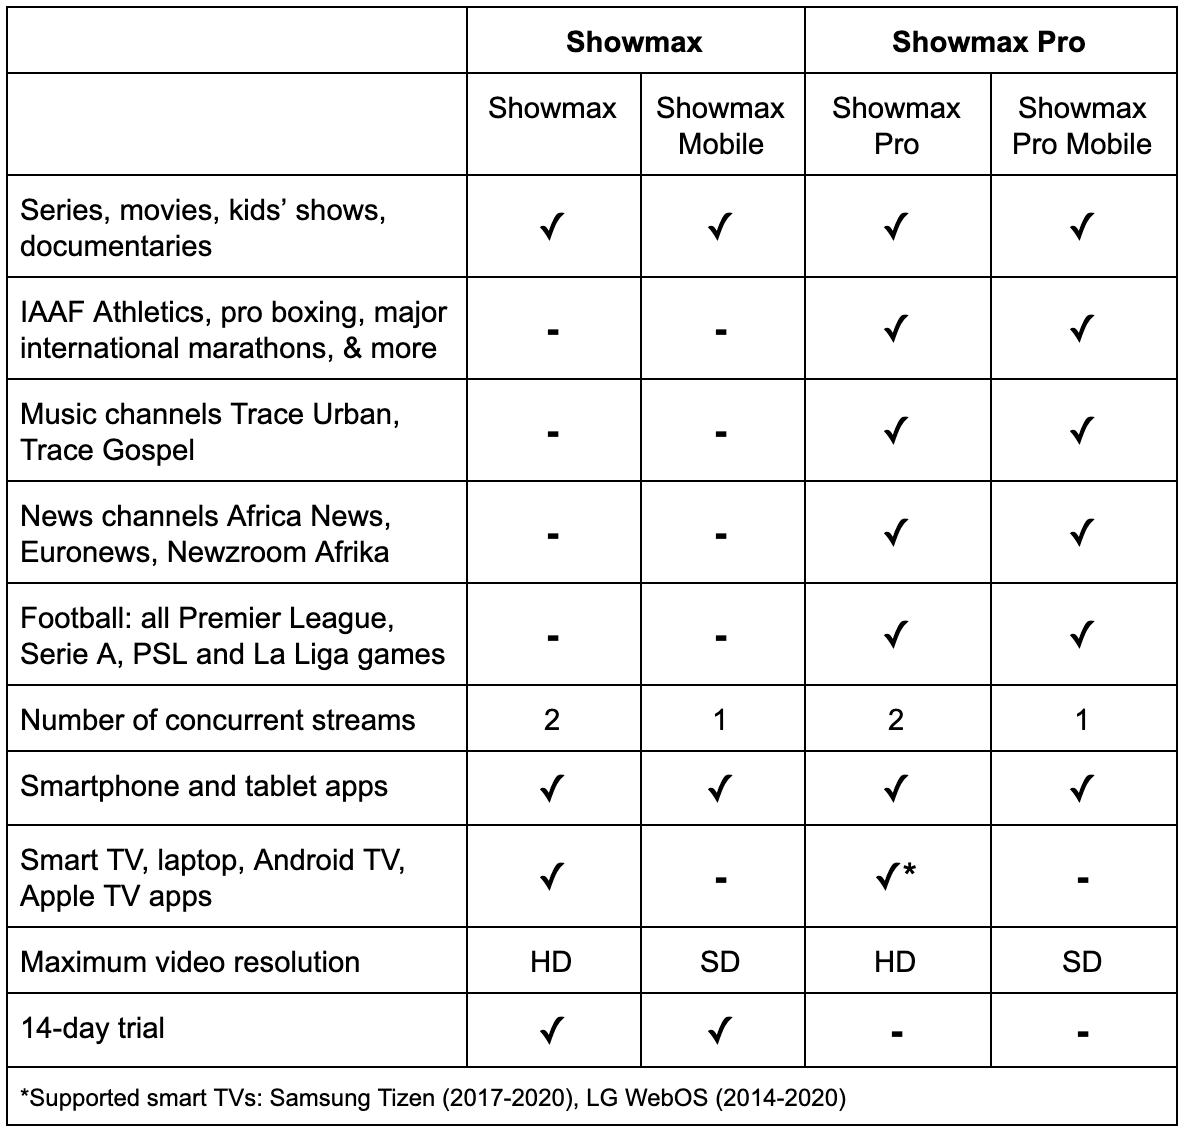 MultiChoice’s Showmax is finally positioned to dominate Africa’s streaming market